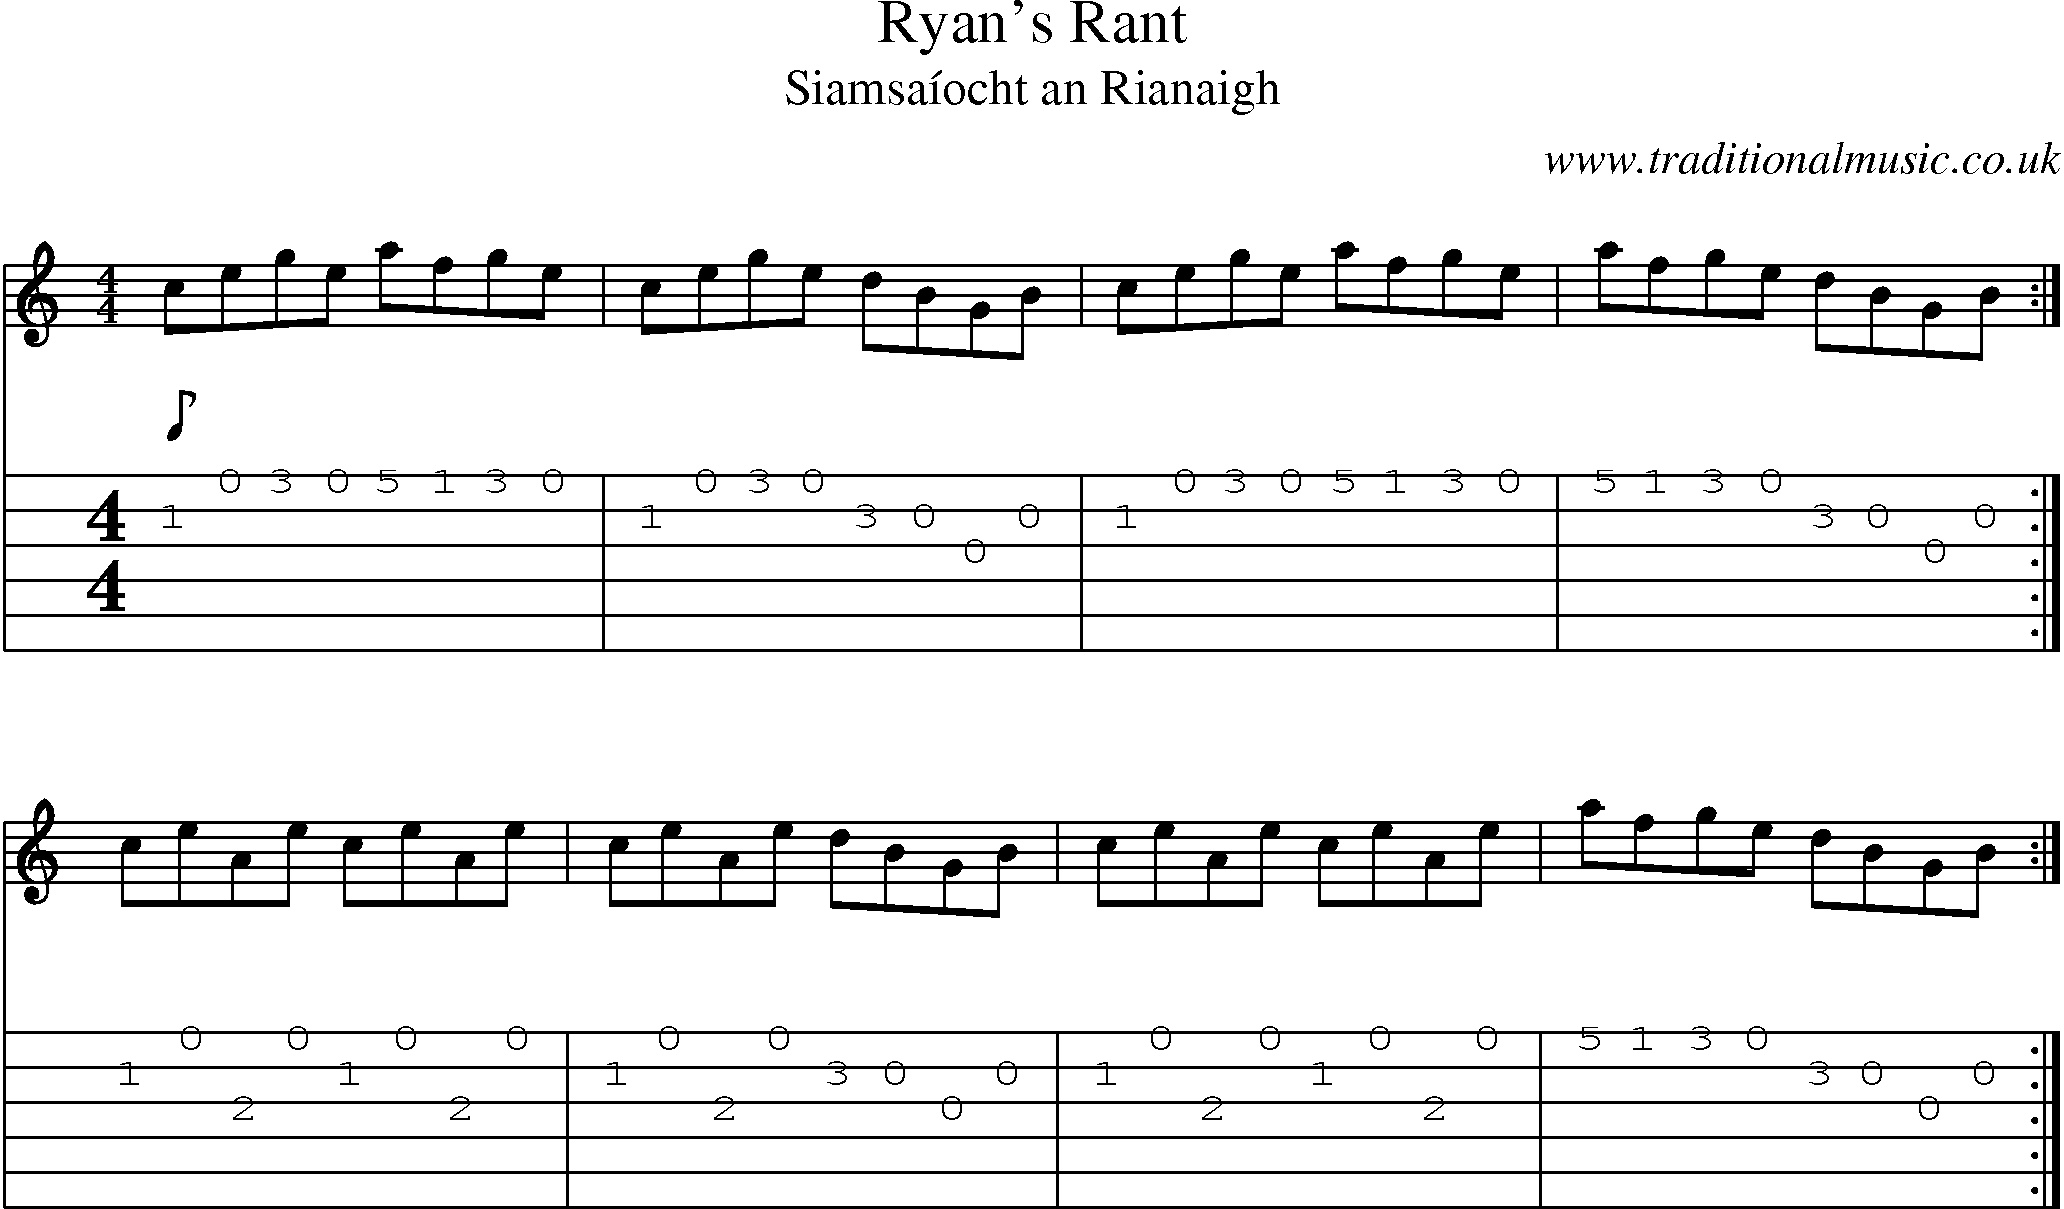 Music Score and Guitar Tabs for Ryans Rant